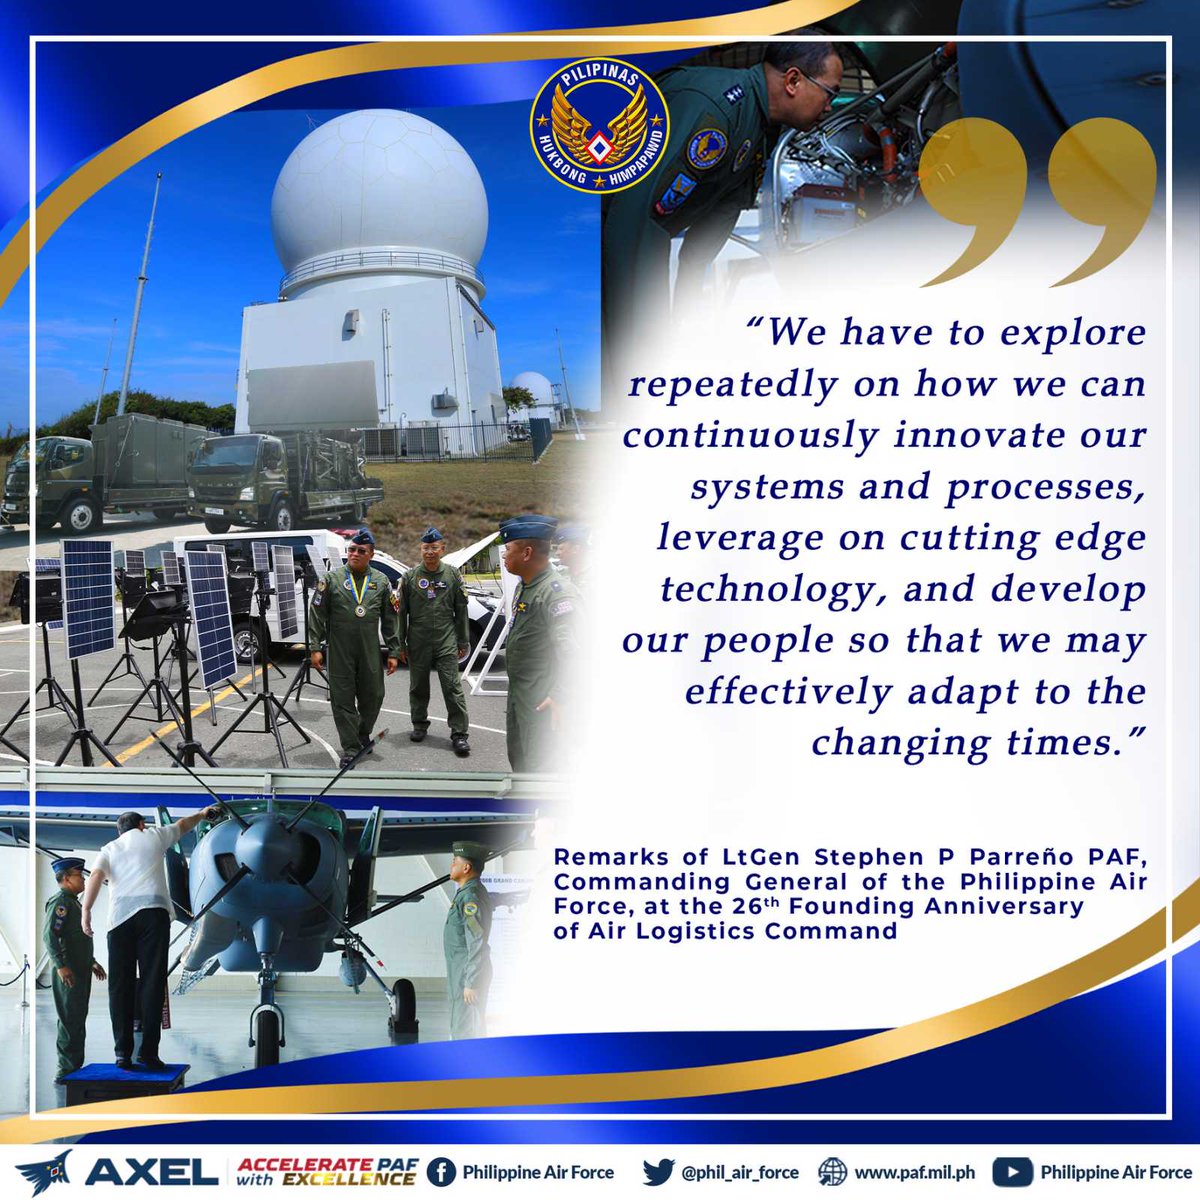 PAF HIGHLIGHTS The Commanding General of the Philippine Air Force, LtGen Stephen P Parreño PAF, reminded the personnel of the Air Logistics Command to continuously grow as a unit that will greatly contribute to ushering the PAF into a modernized force. #modernization #Anniversary